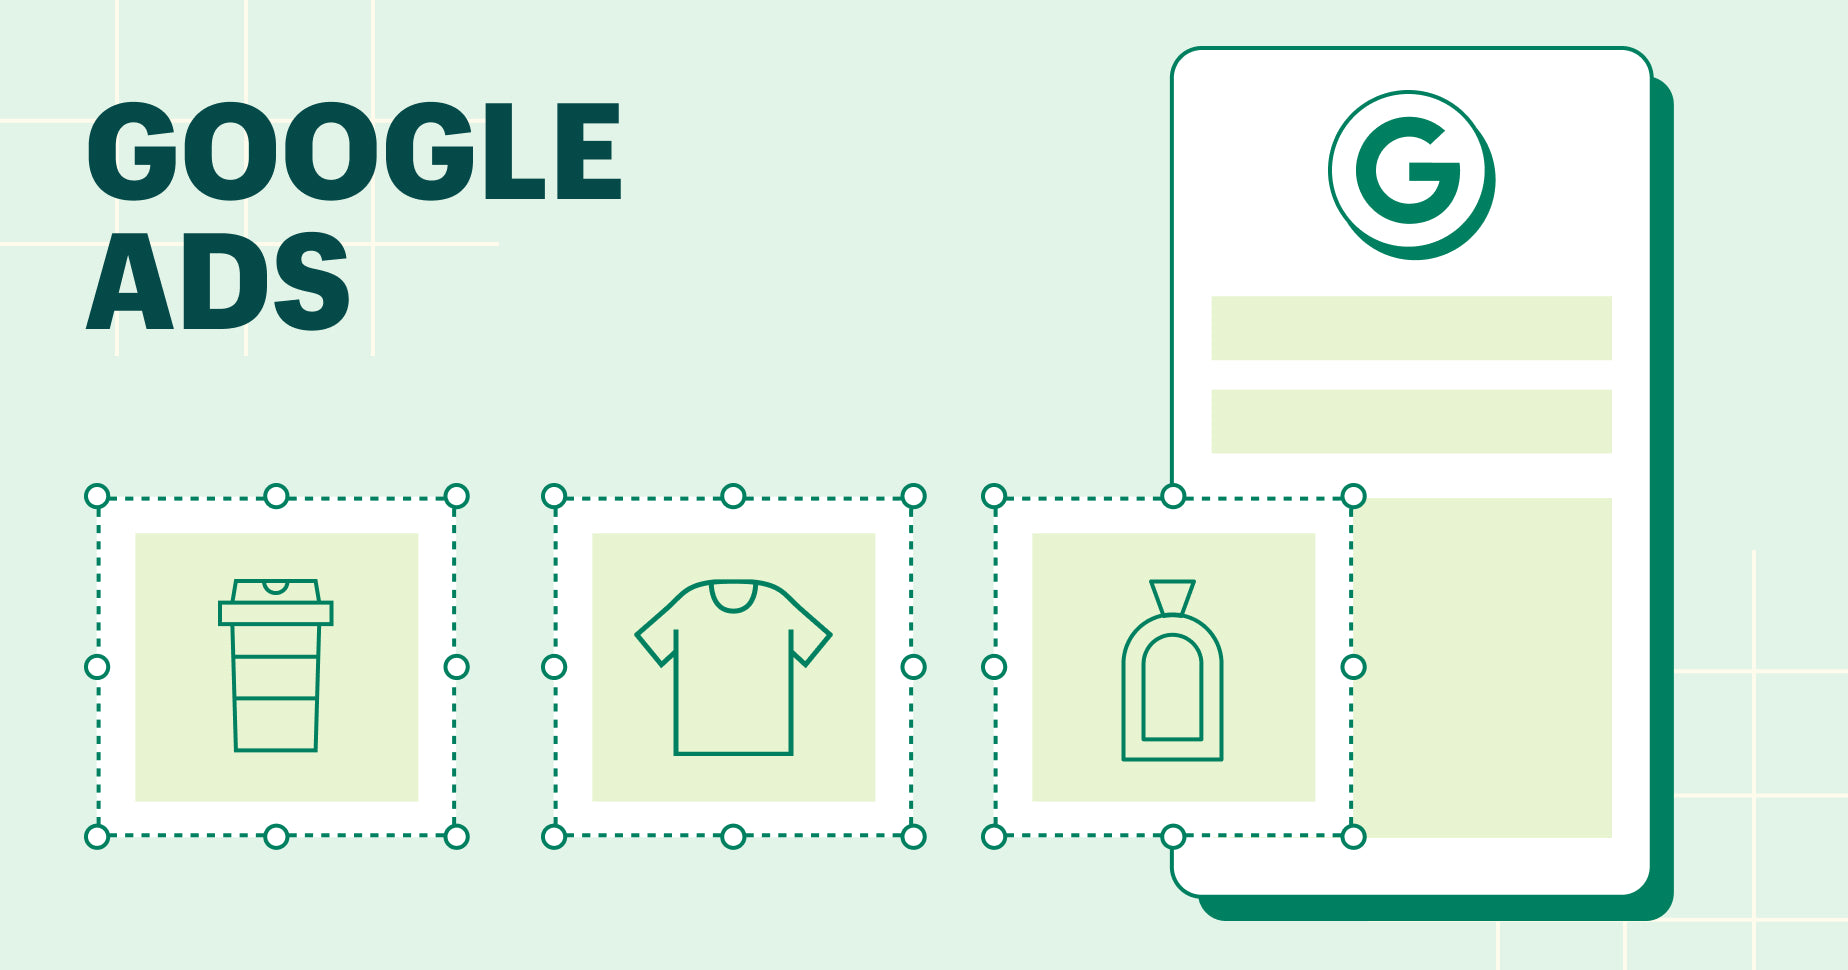 google ads text and icons of a vial, a tshirt, and a bottle